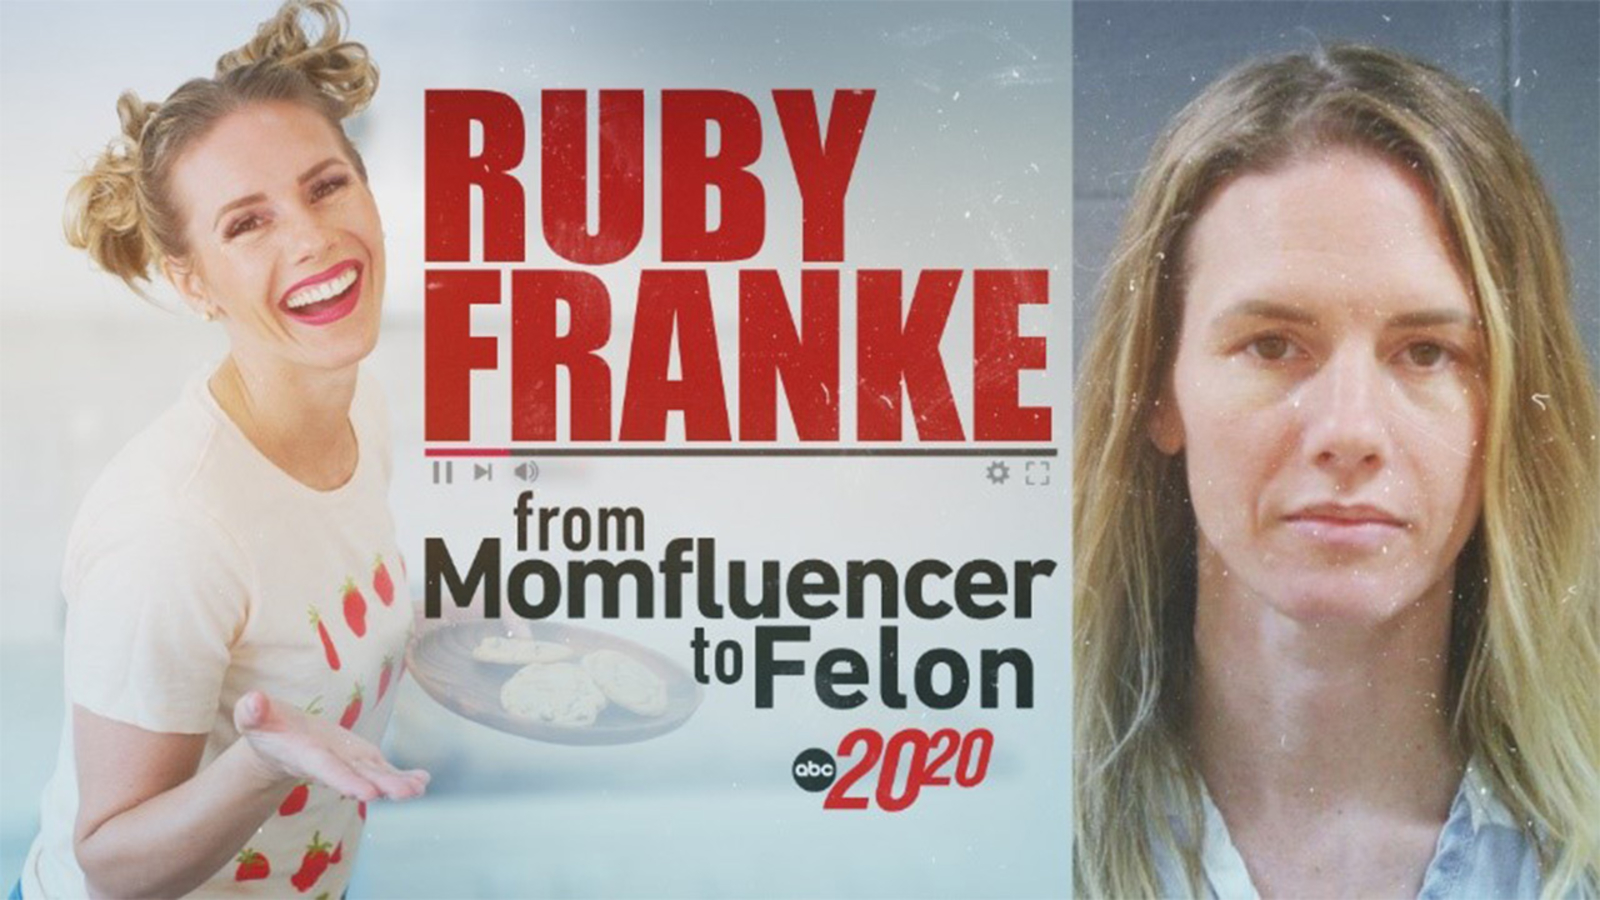 New video, photos of Ruby Franke's son reveal disturbing details that led to her arrest, conviction